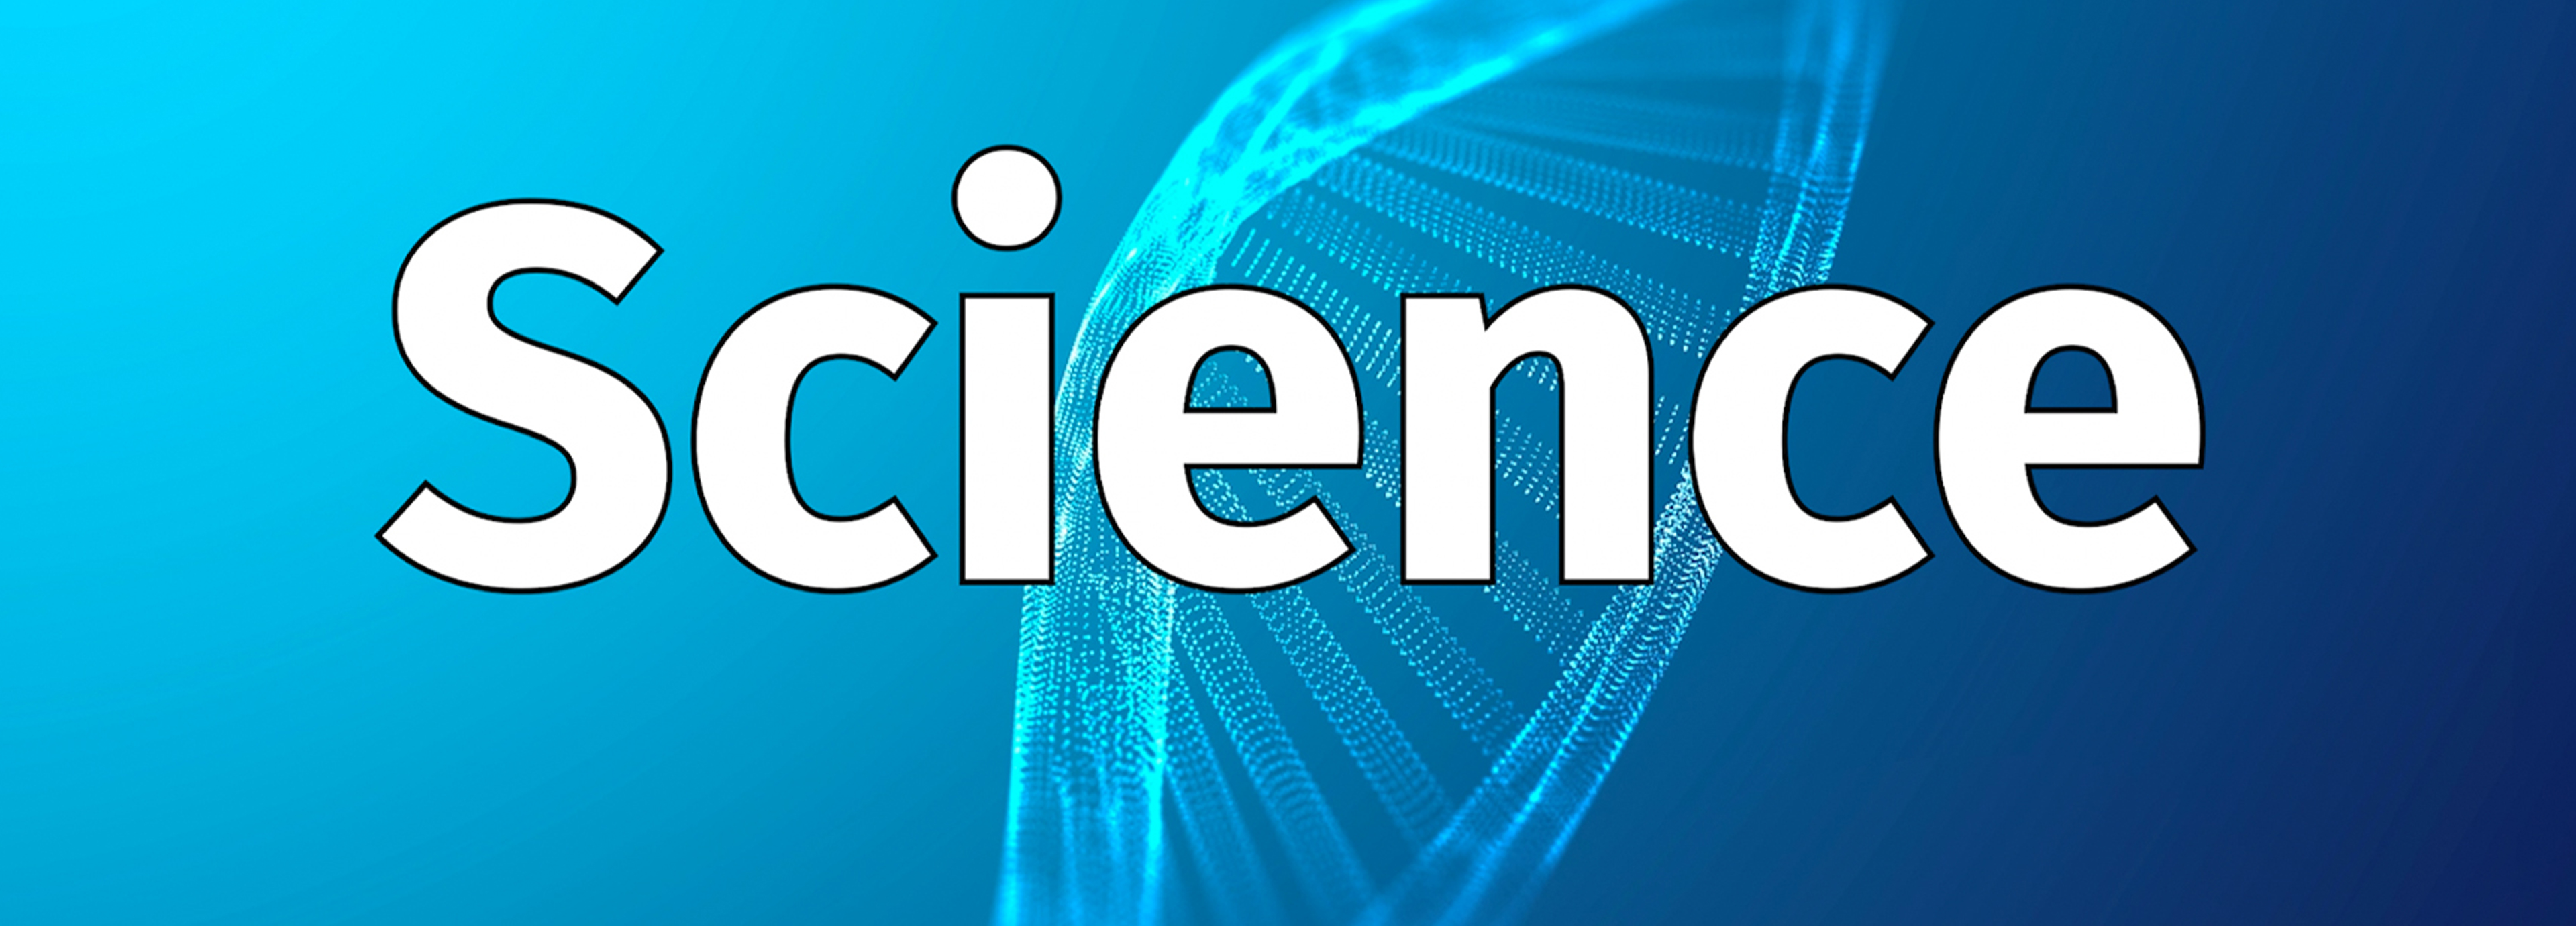 new banner for science 1920600